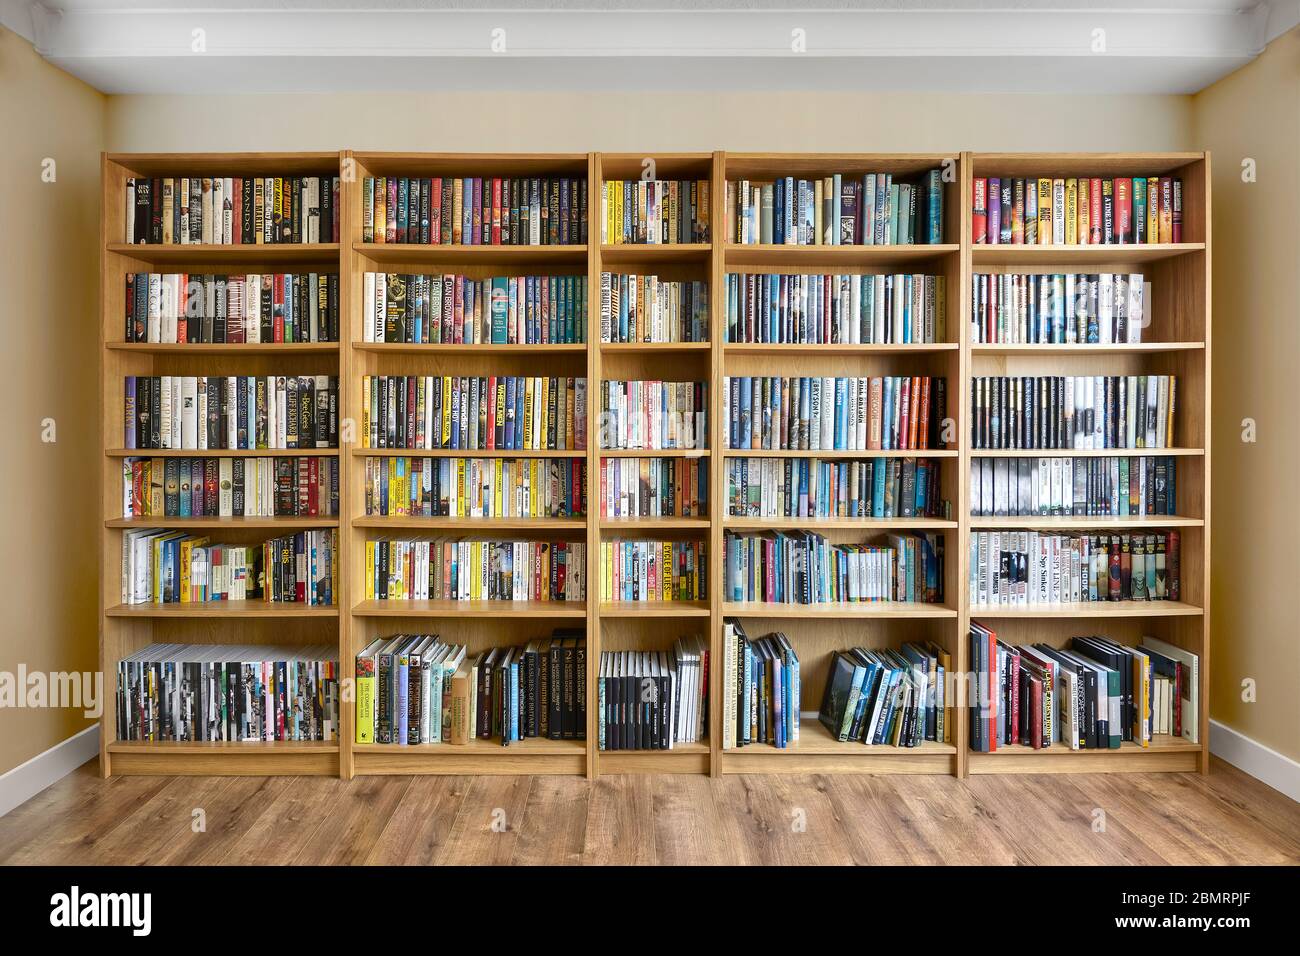 Wooden bookshelves filled with books Stock Photo